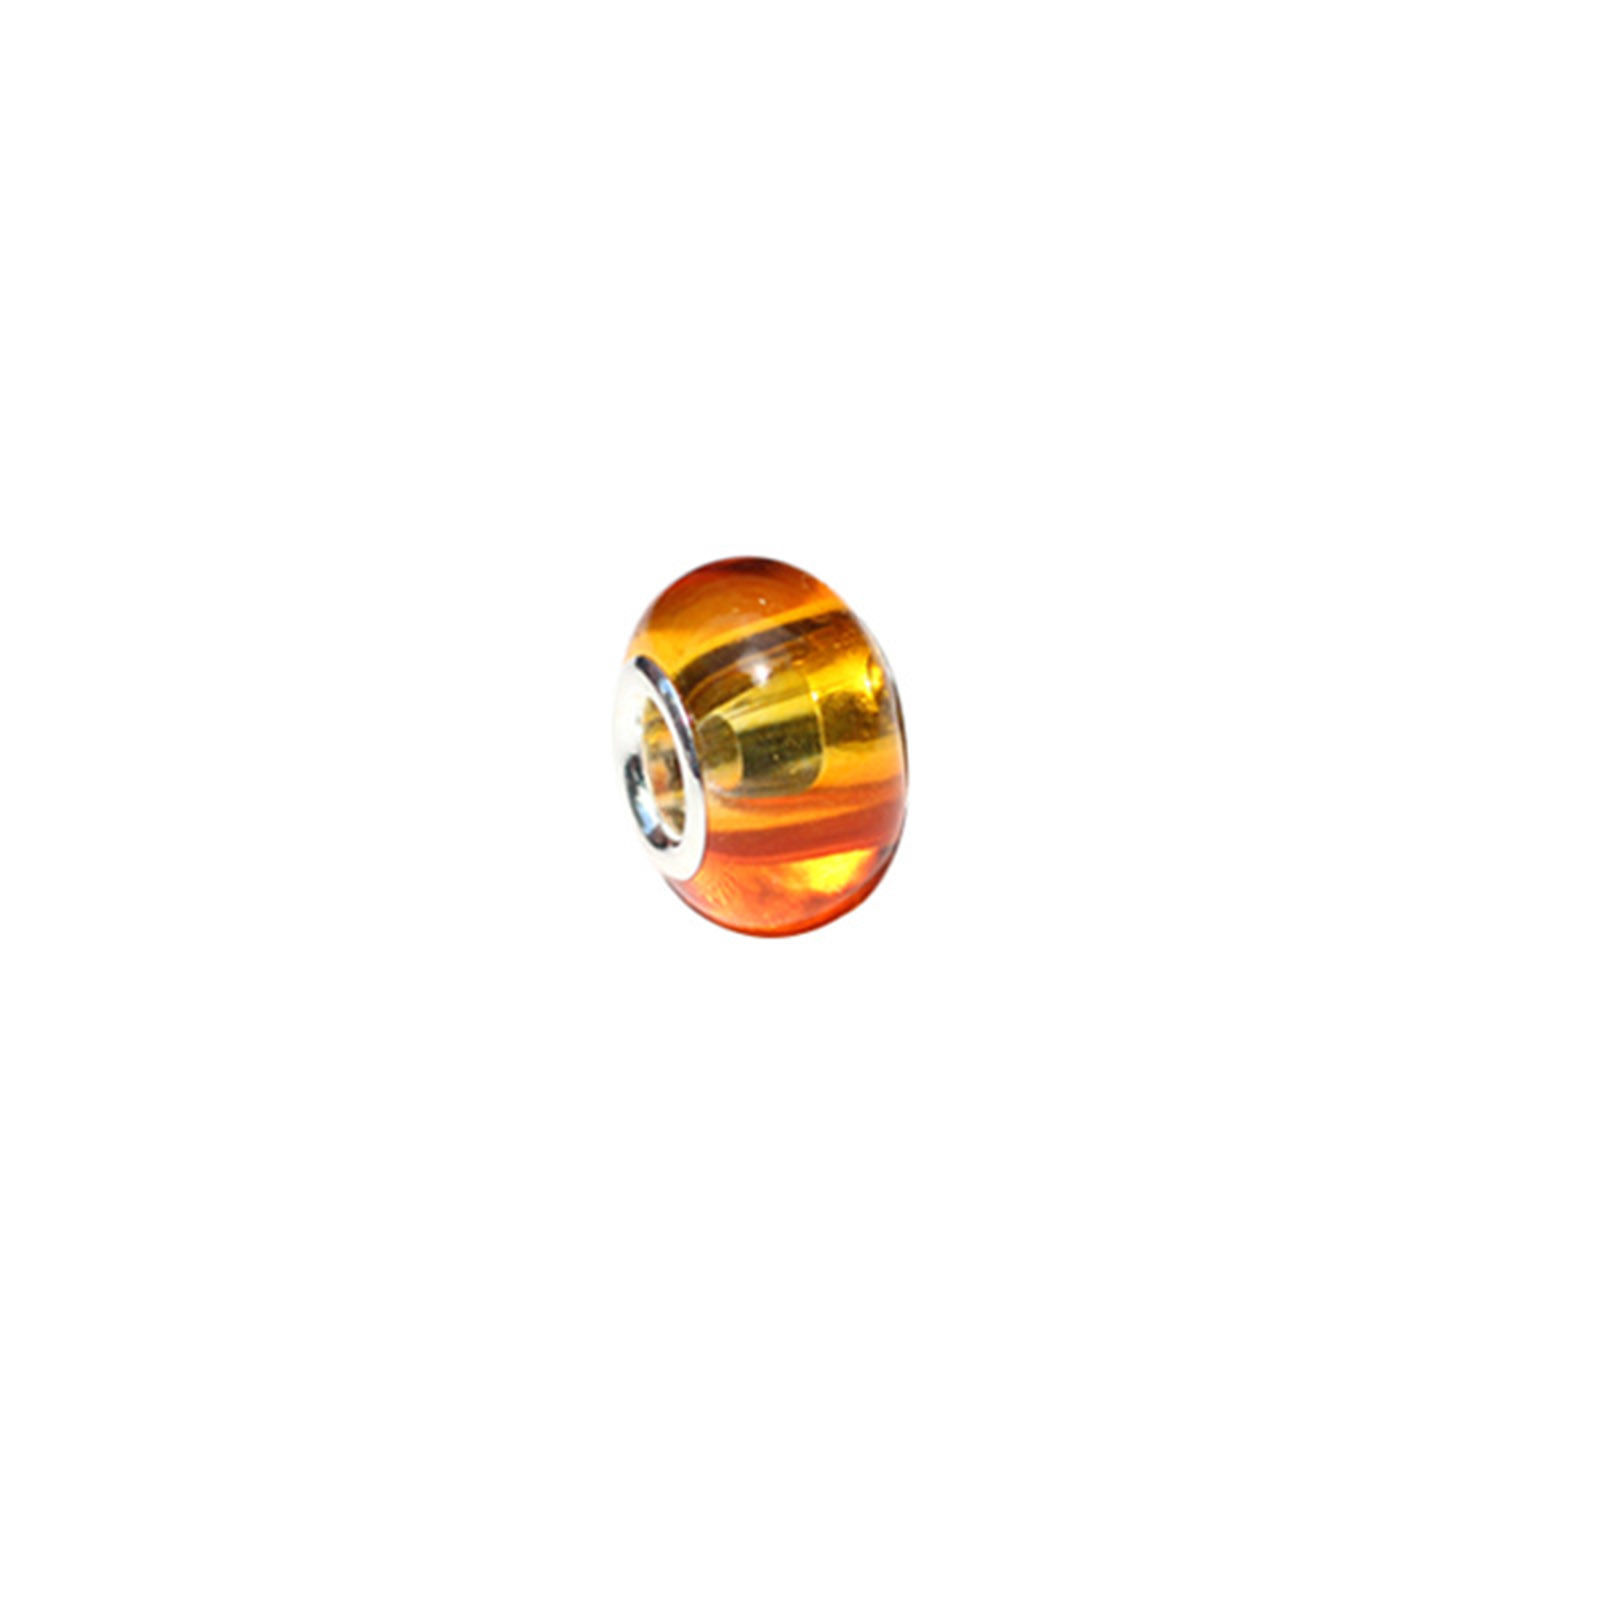 Picture of Resin European Style Large Hole Charm Beads Yellow & Orange Round Gradient Color 14mm x 9mm, Hole: Approx 5mm, 20 PCs